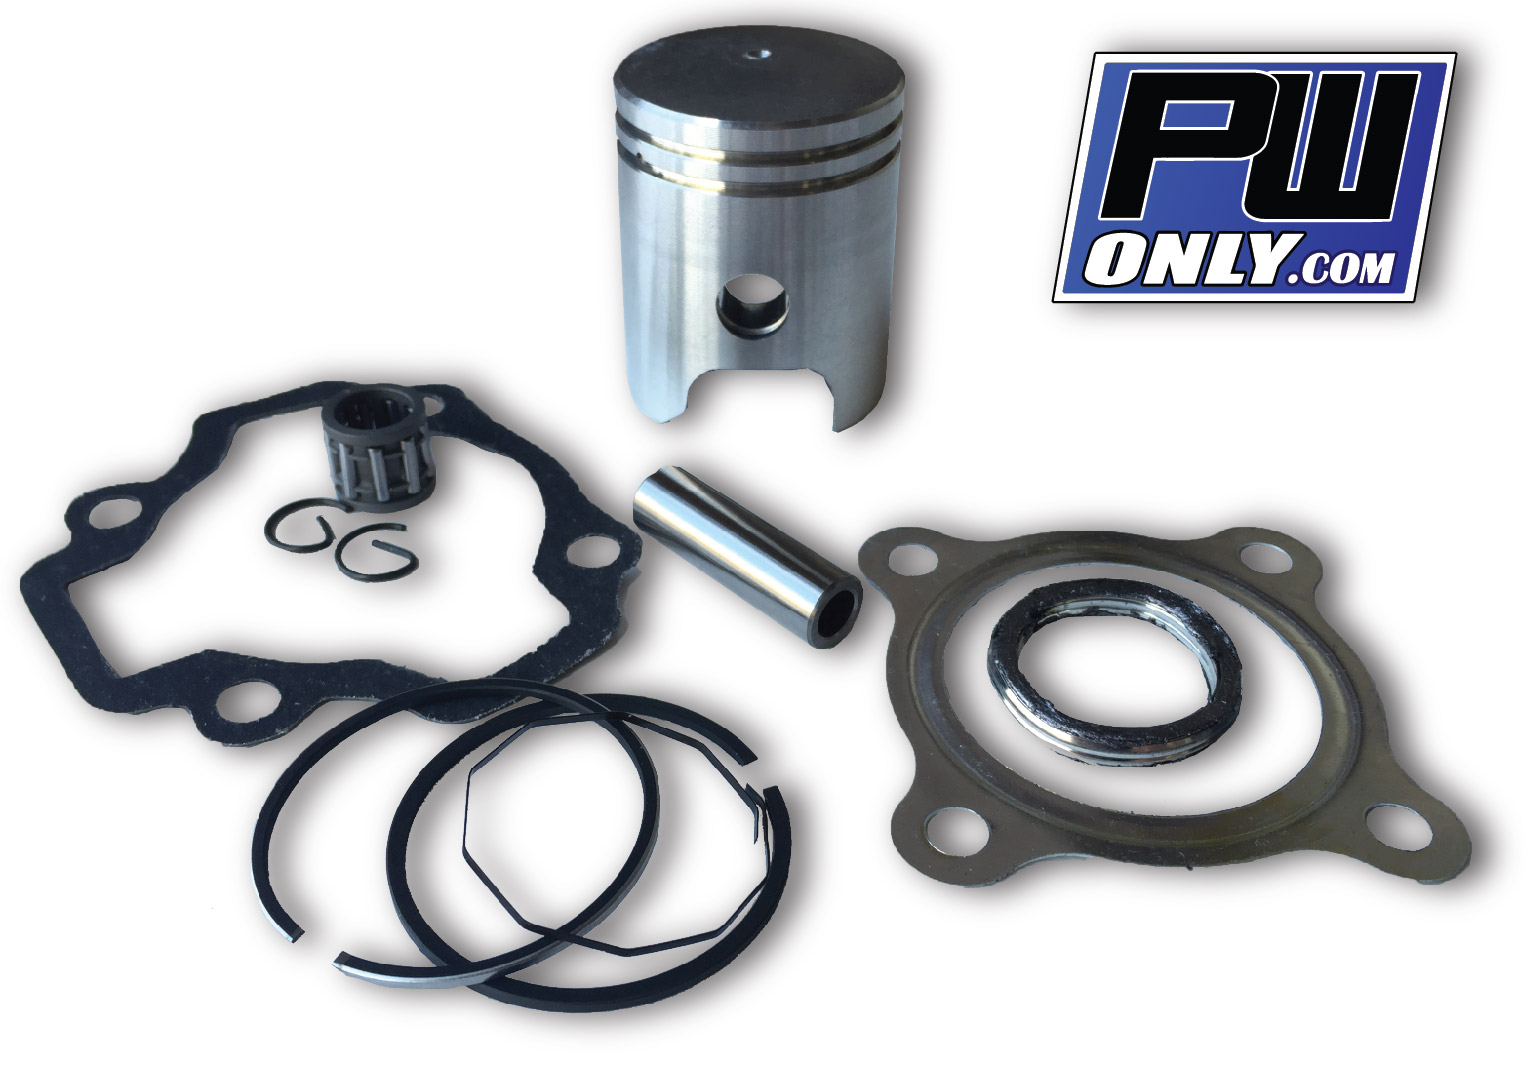 Flymotorparts Stock Cylinder FITS Yamaha PW 50 PW50 QT 50 QT50 Piston Ring Gasket Top End Set Kit New 